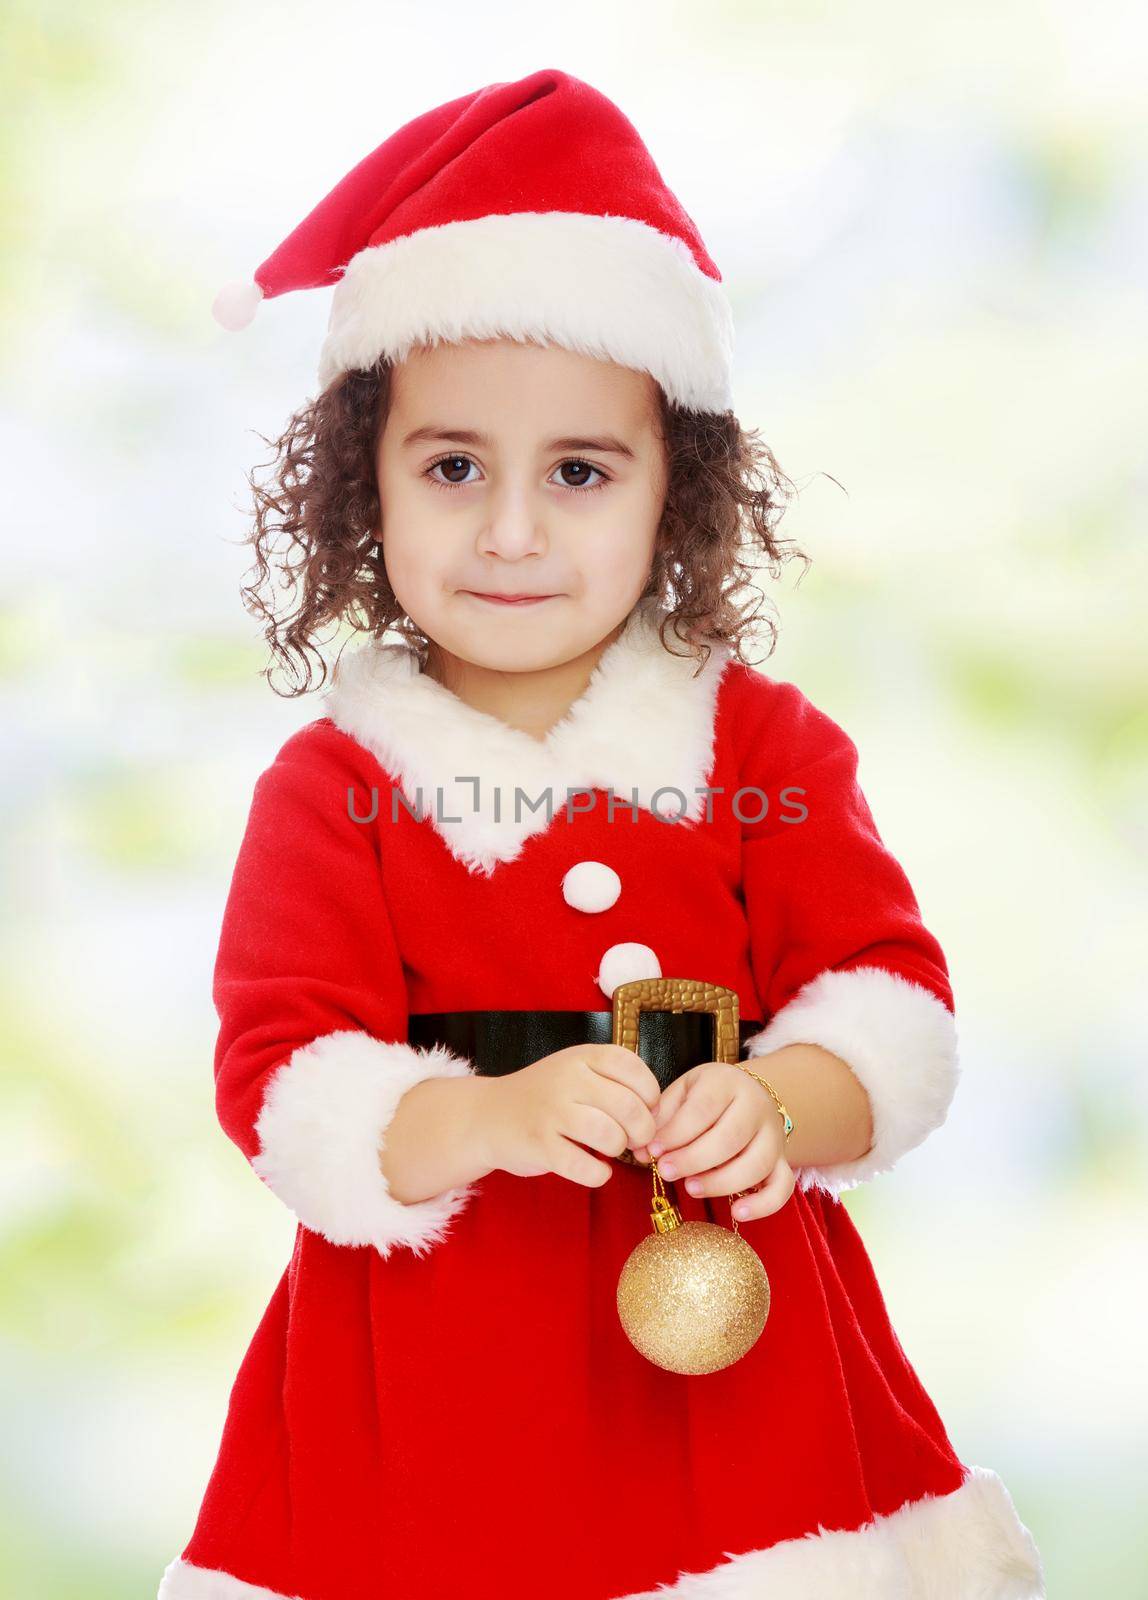 Very cute ,with curly hair little girl in a suit and cap of Santa Claus , is holding a Christmas toy. Close-up.white-green blurred abstract background with snowflakes.